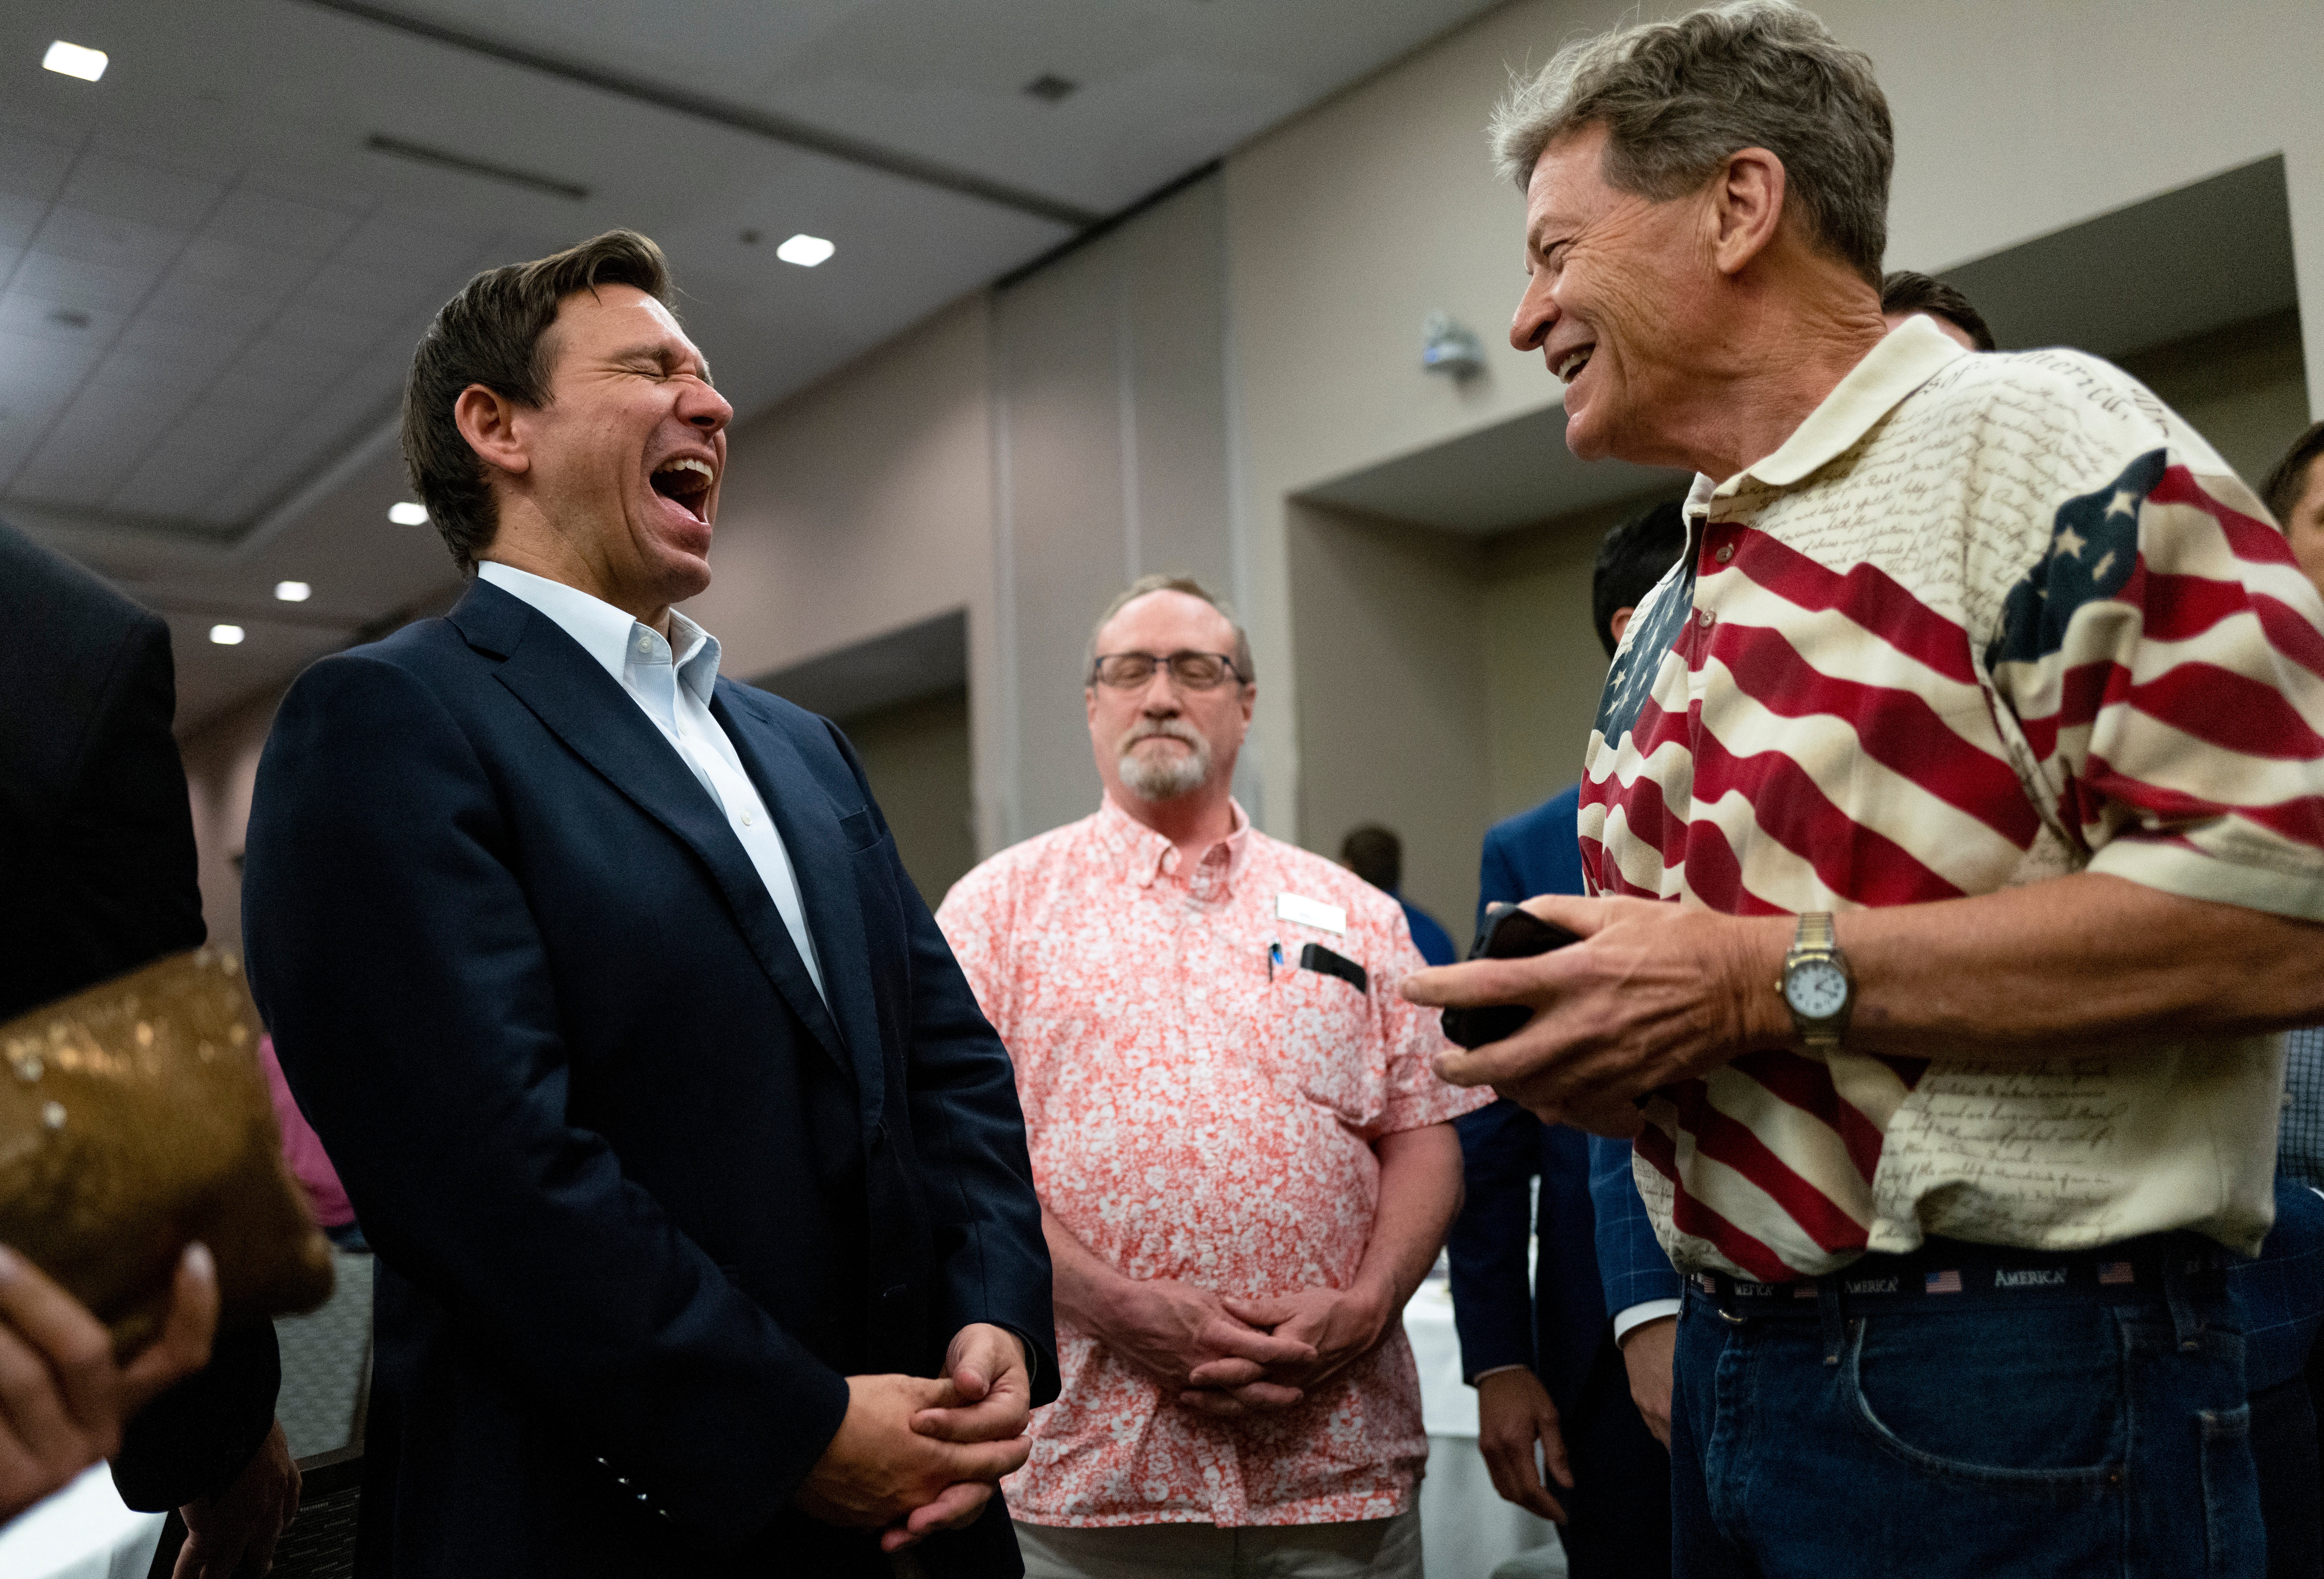 Ron DeSantis shares a joke with voters during an Iowa GOP reception in Cedar Rapids